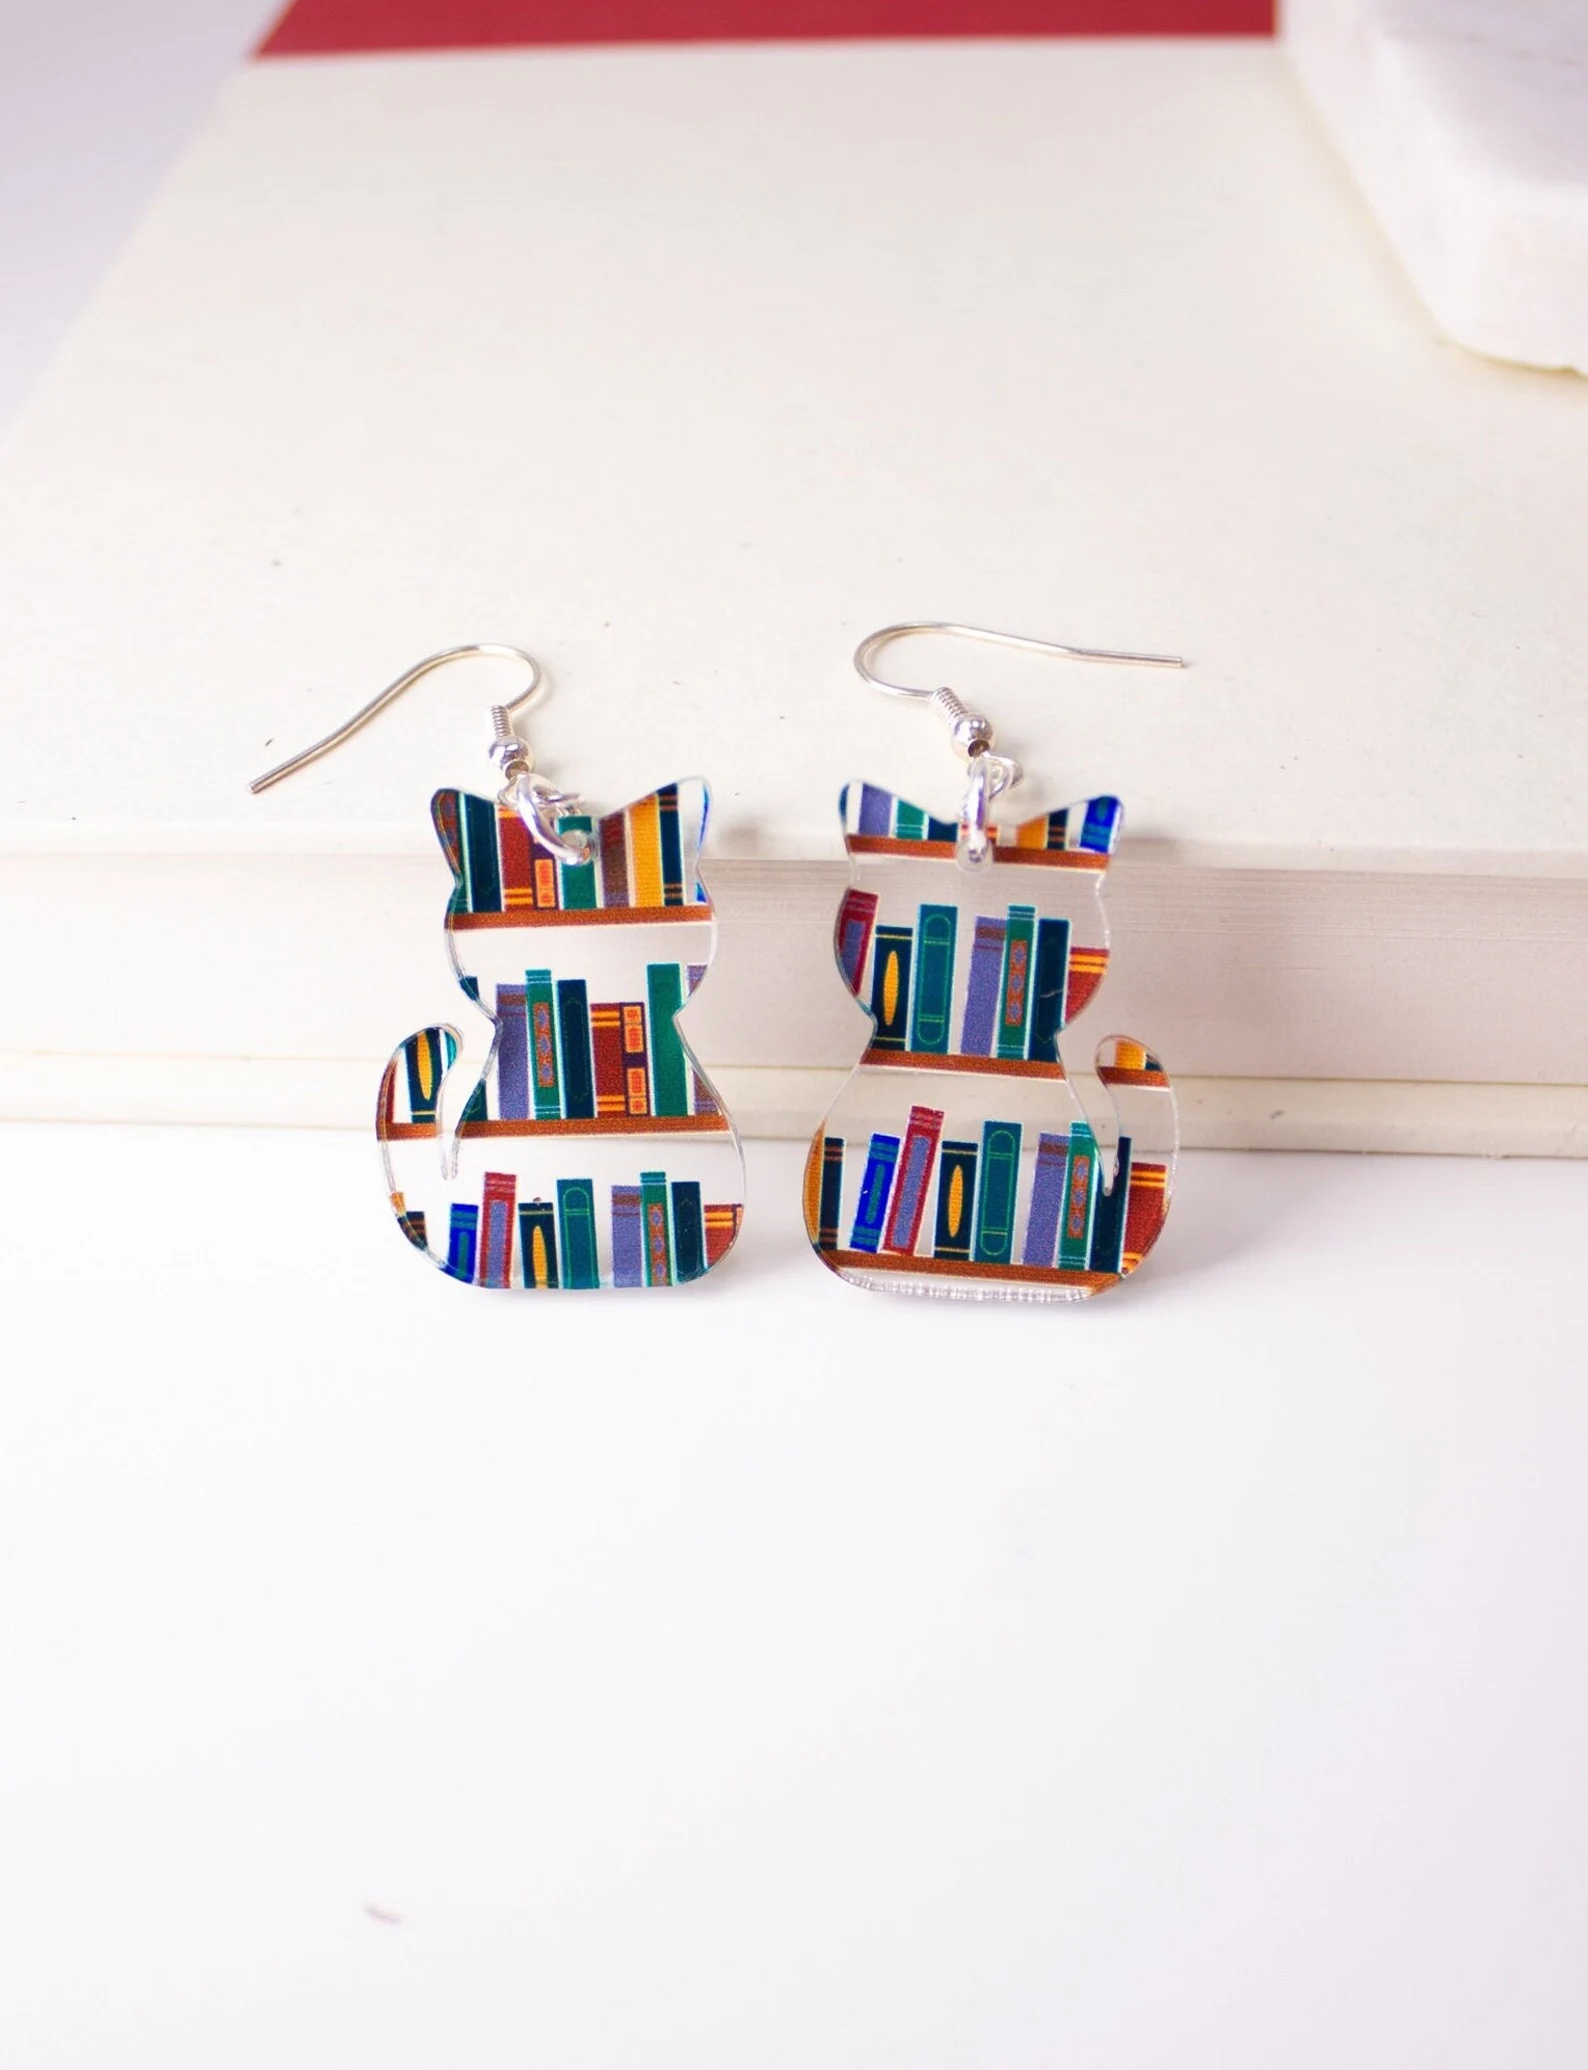 a photo of two earring made of clear plastic in the shape of two cats. Illustrations of colorful books run across each cat-shaped earring.